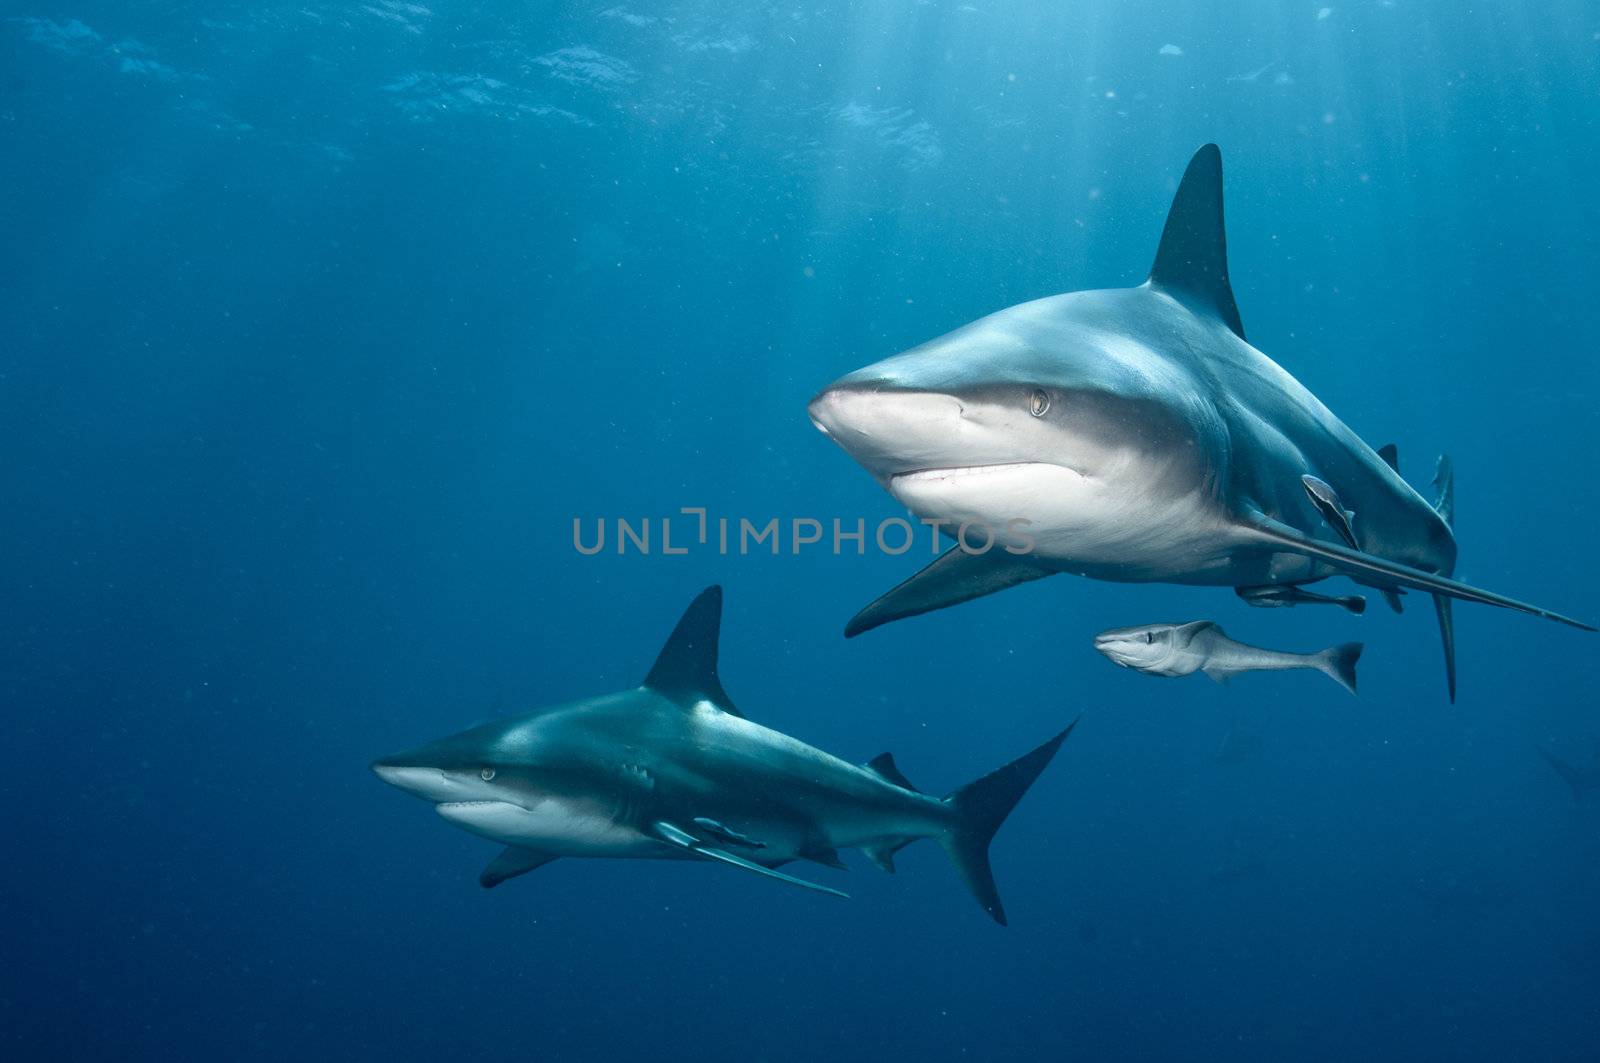 The front view of two blacktip sharks nearing, KwaZulu Natal, South Africa